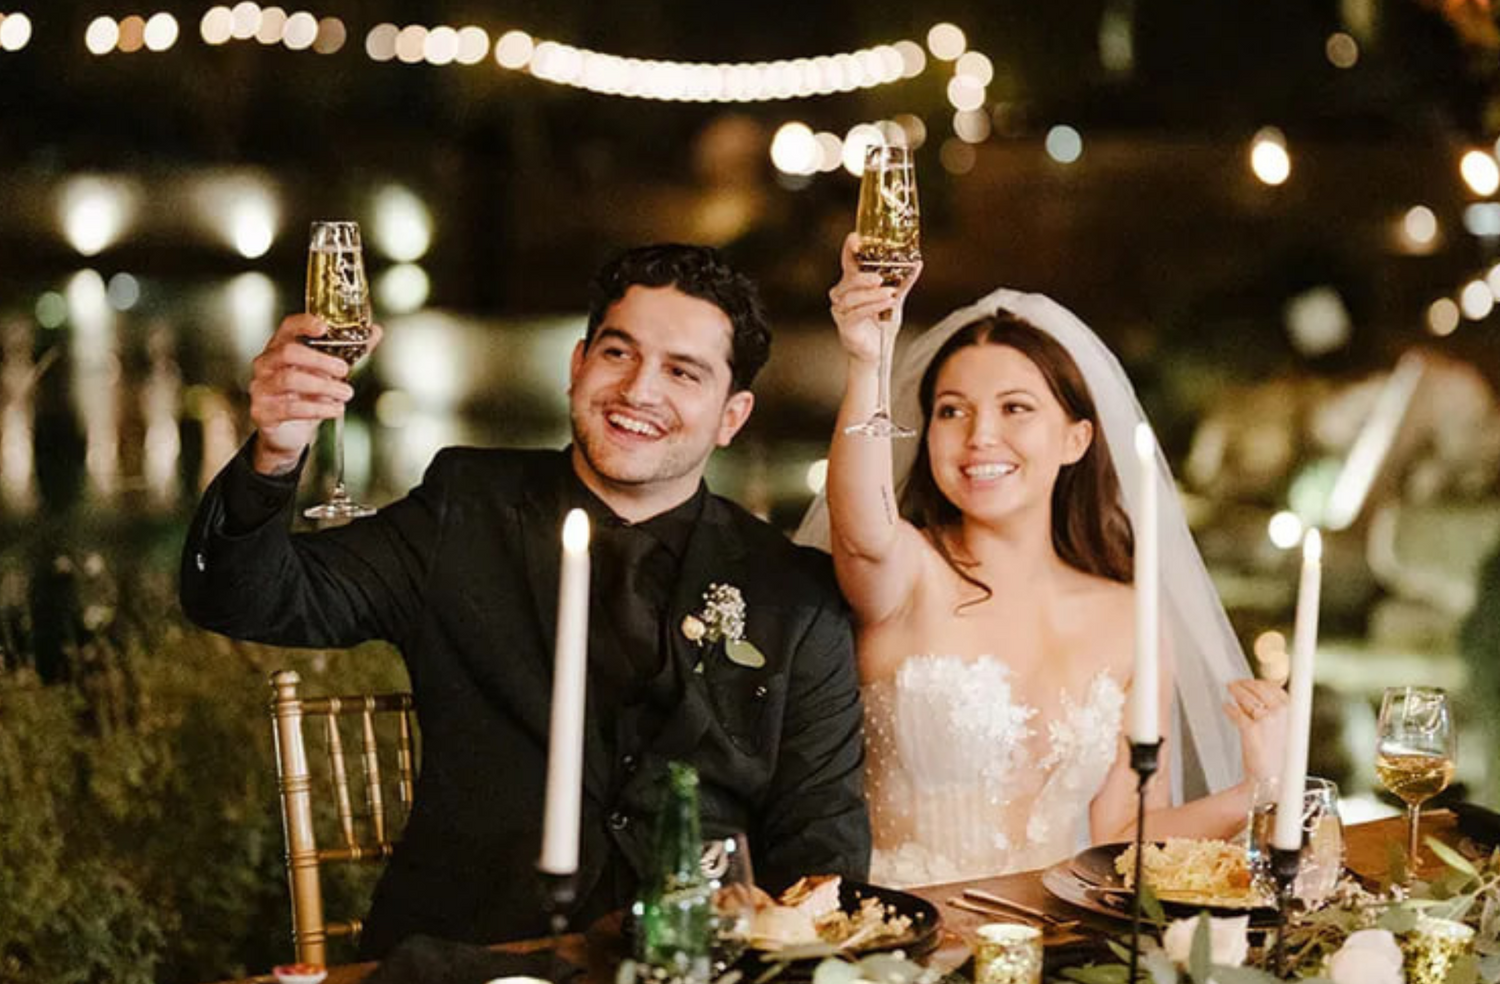 Let's dive into the atmosphere of "Yellowjackets" Actress Samantha Hanratty's wedding!